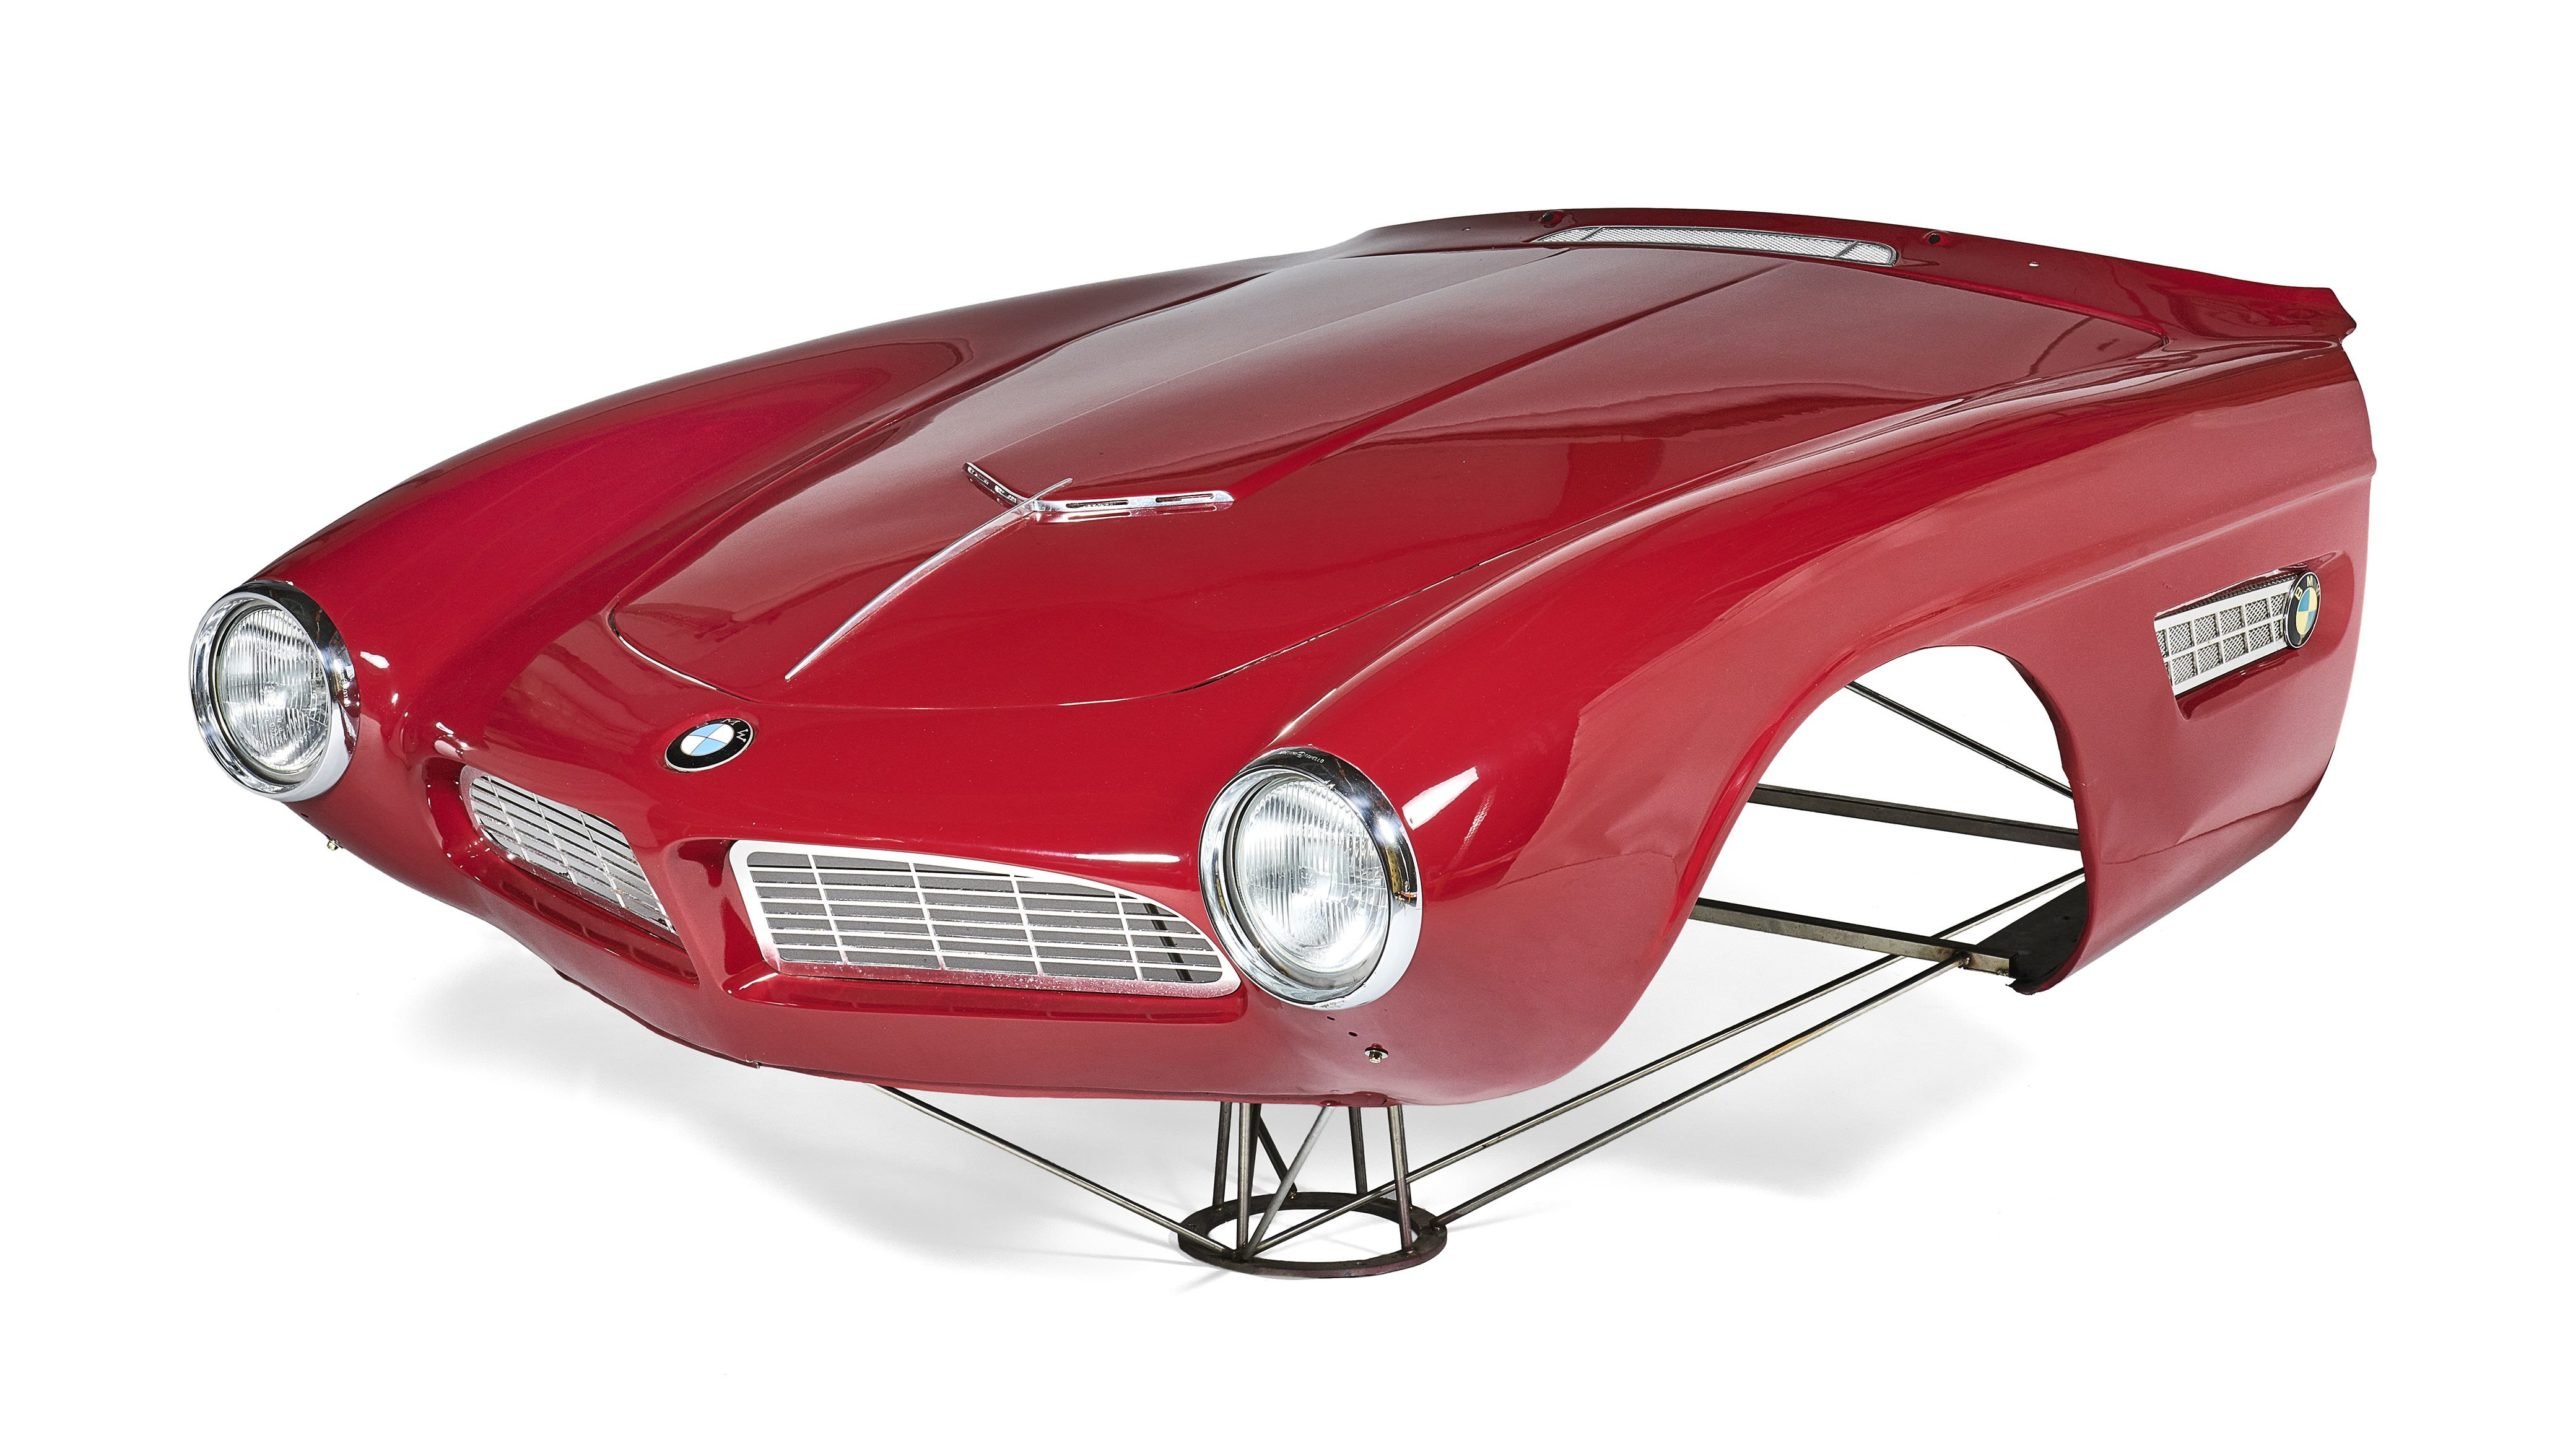 For Sale: A BMW 507 Front End Mounted To A Display Base via @Silodrome